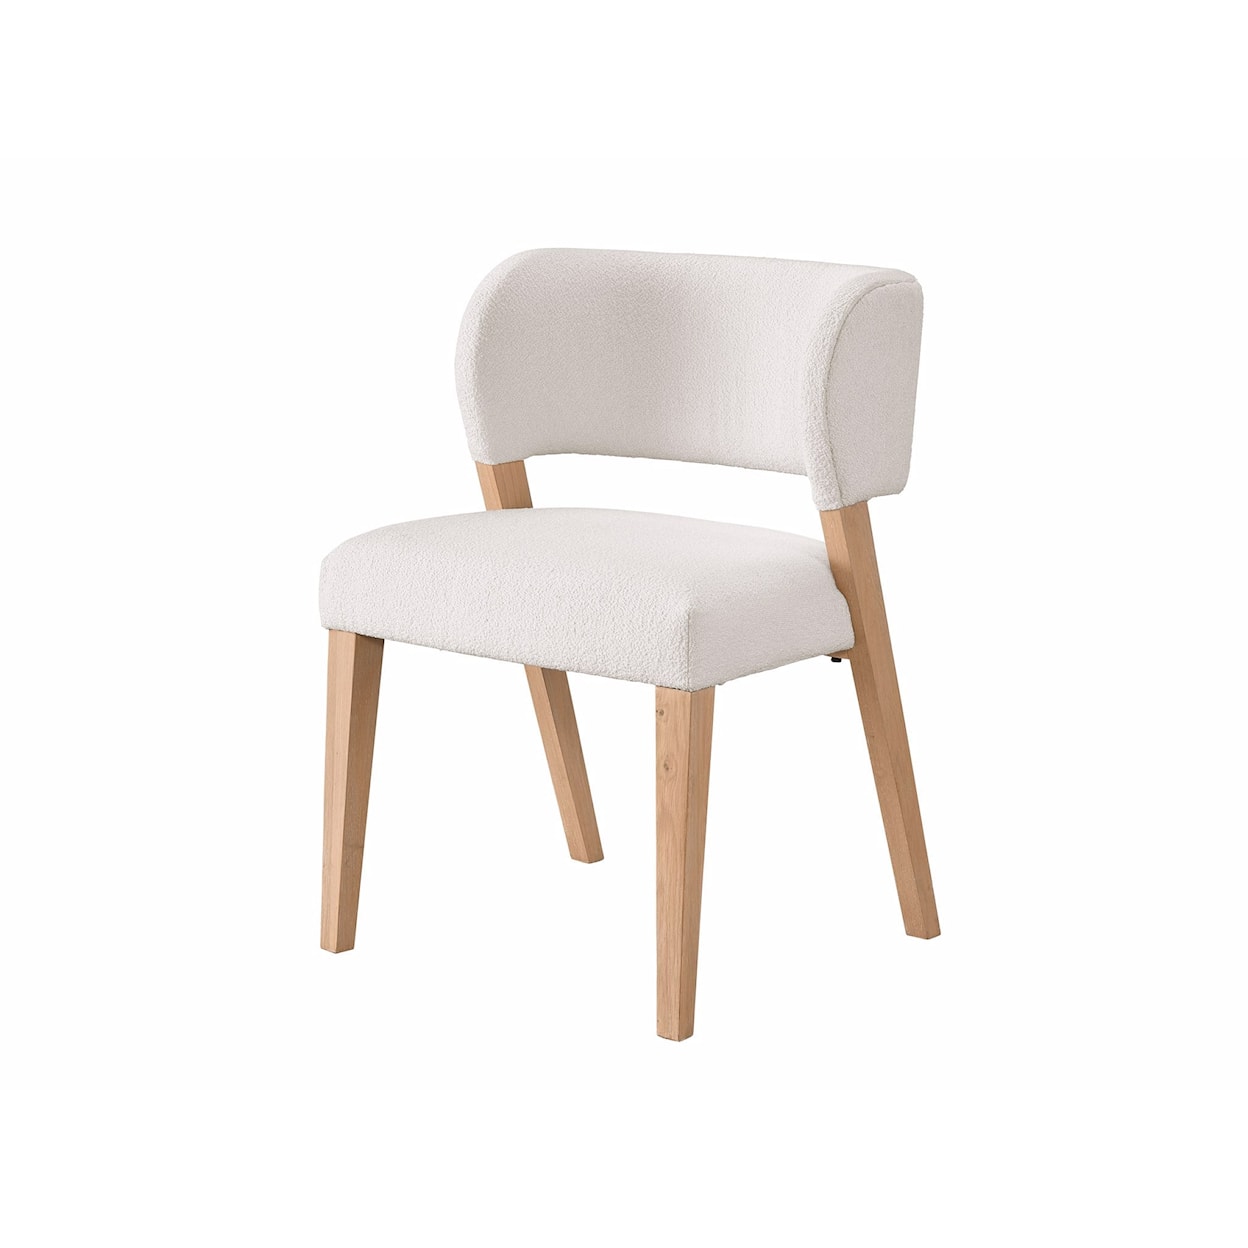 Universal Nomad Side Dining Chair